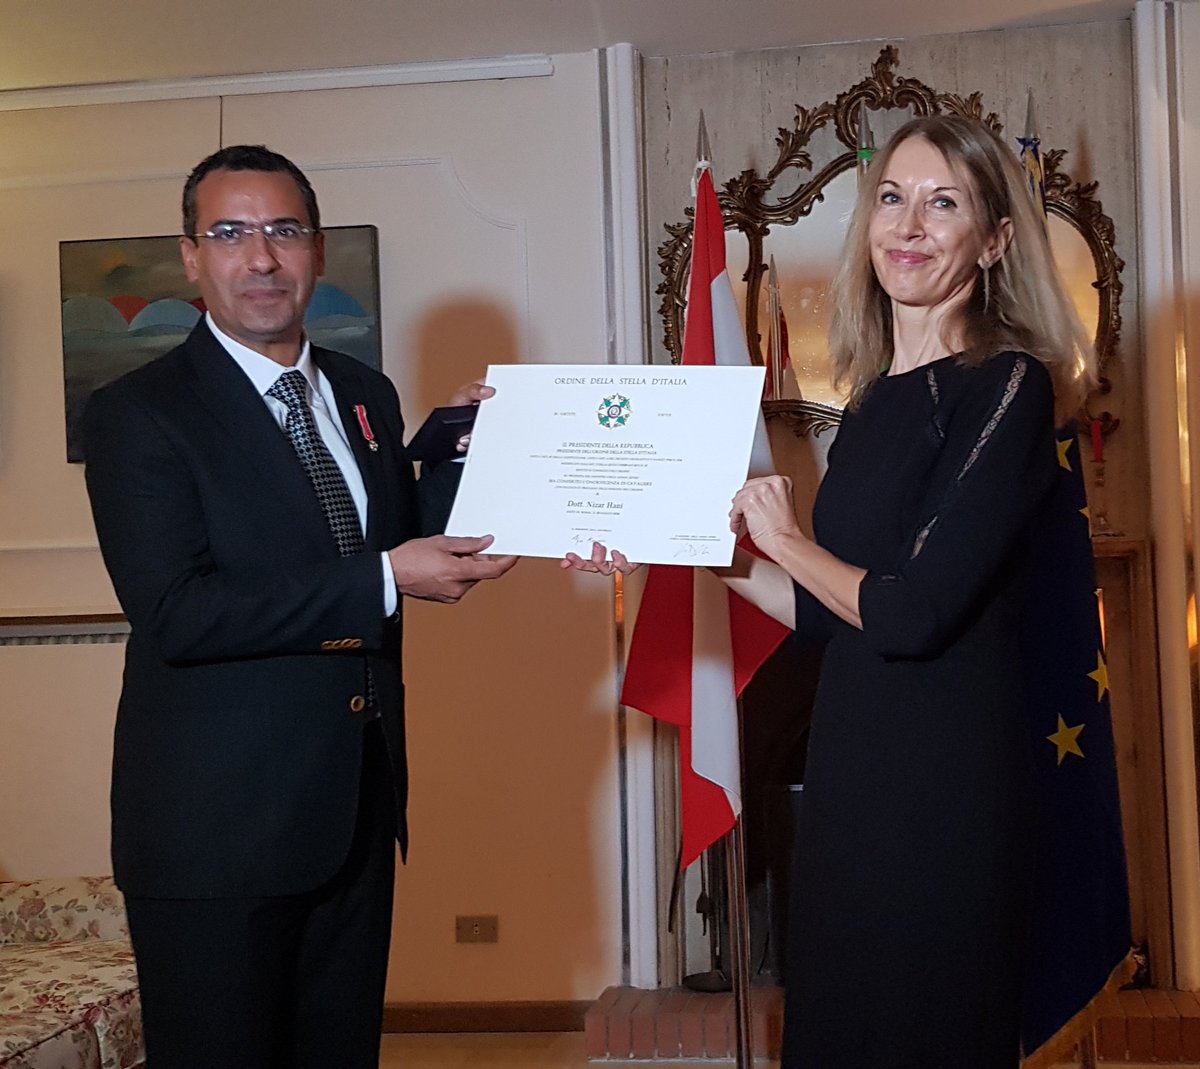 Knighthood of the Order of the Star of Italy to Nizar Hani, Director of the Shouf Biosphere Reserve. A leading example in safeguarding environmental, biological & naturalistic heritage of Lebanon. Italy & @coopita_beirut proud of the partnership with @CedarReserve and its team.